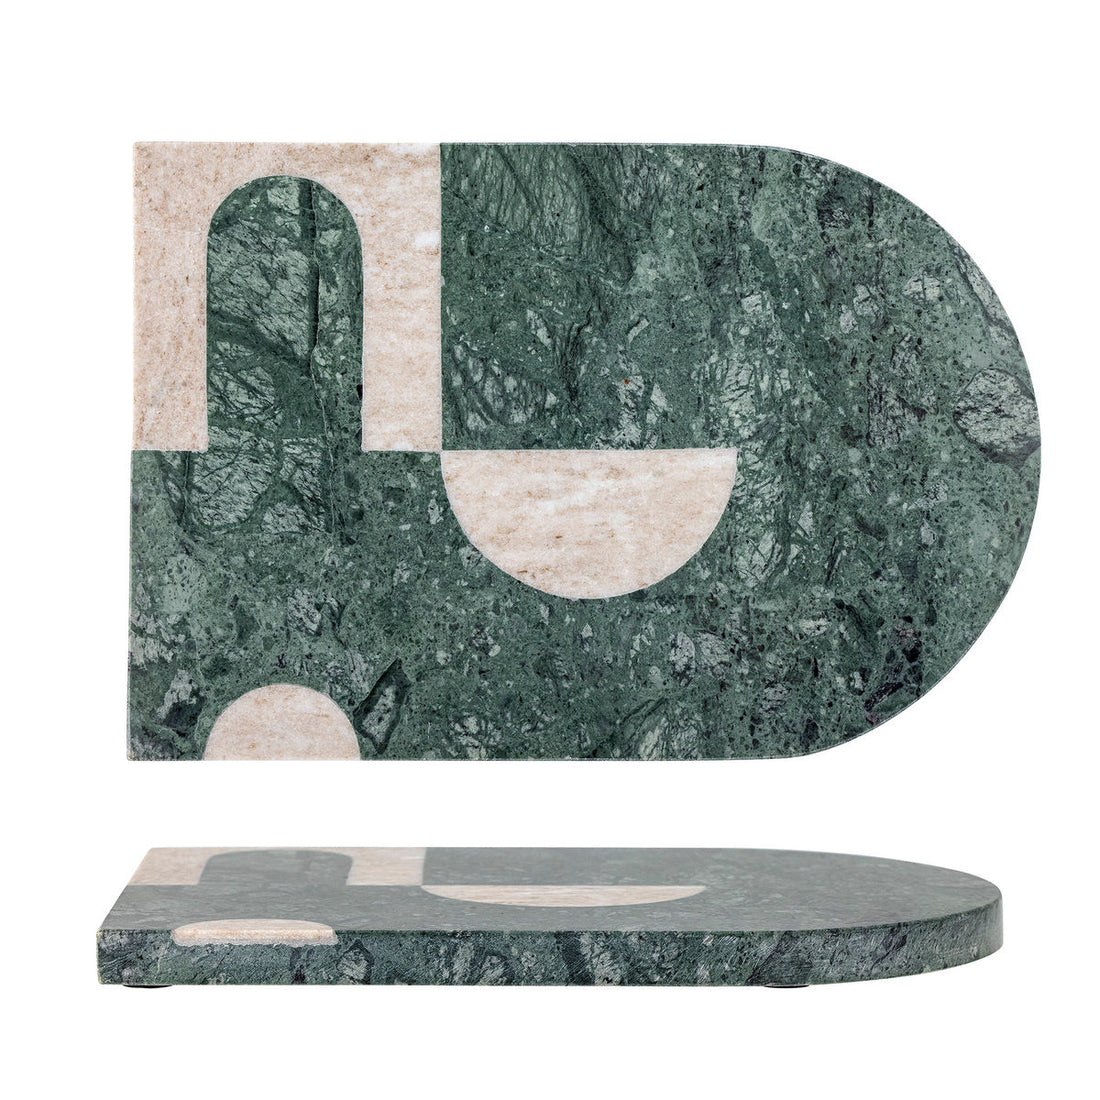 Bloomingville Abrianna Cutting Board, Green, Marble